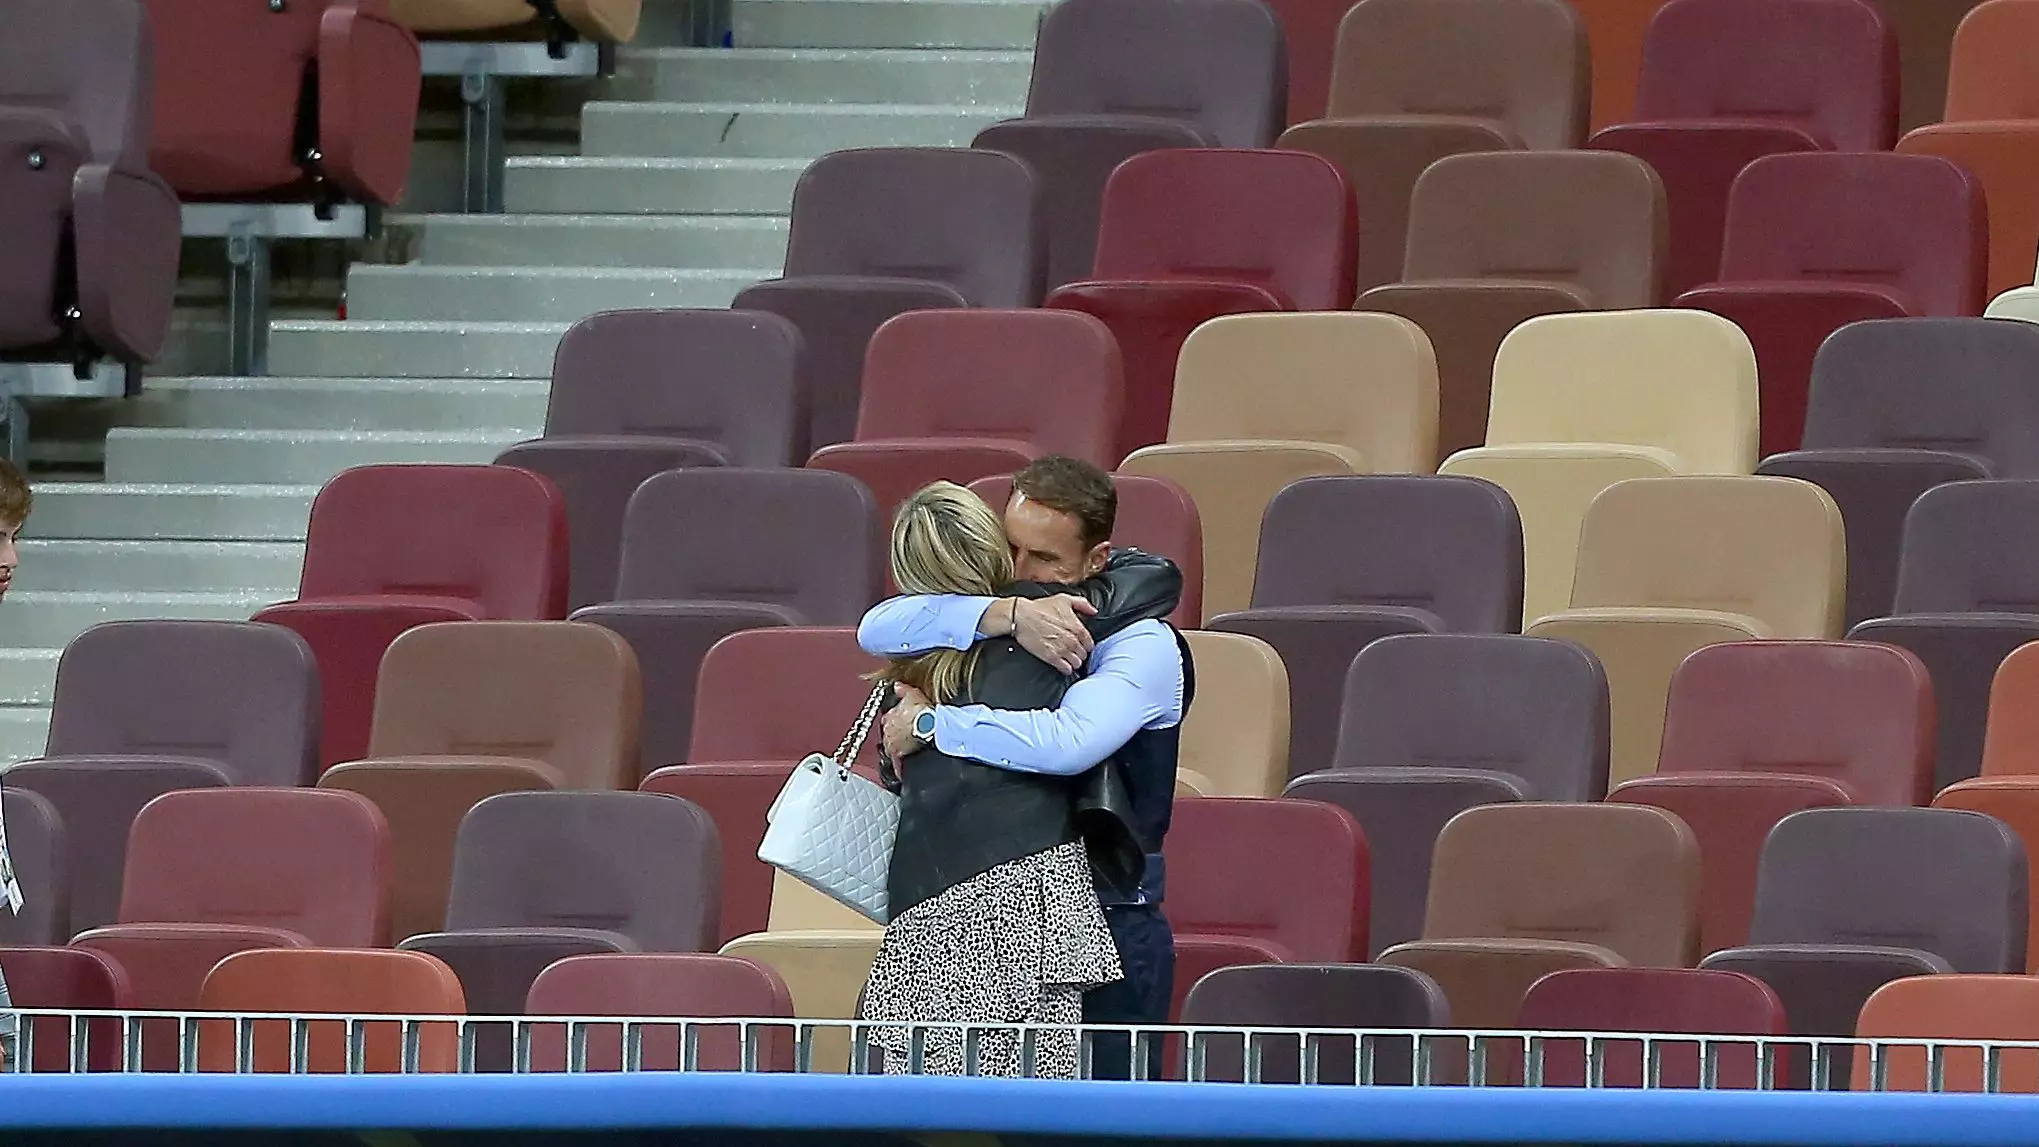 Gareth Southgate Comforted By His Wife In Empty World Cup Stadium